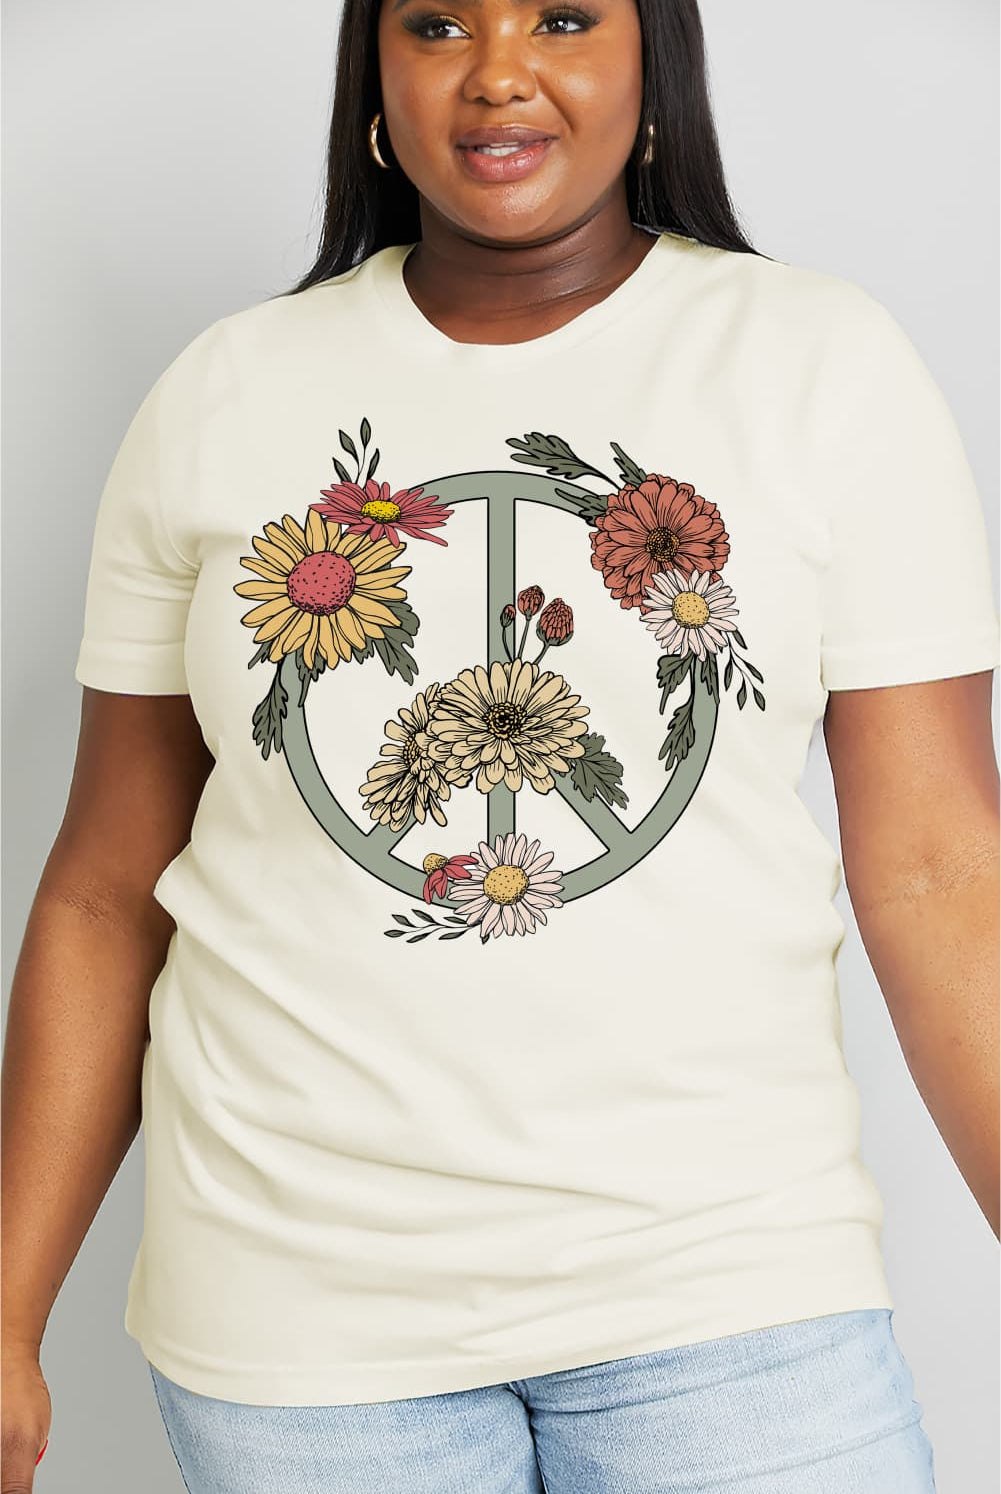 Light Gray Simply Love Full Size Flower Graphic Cotton Tee Tops